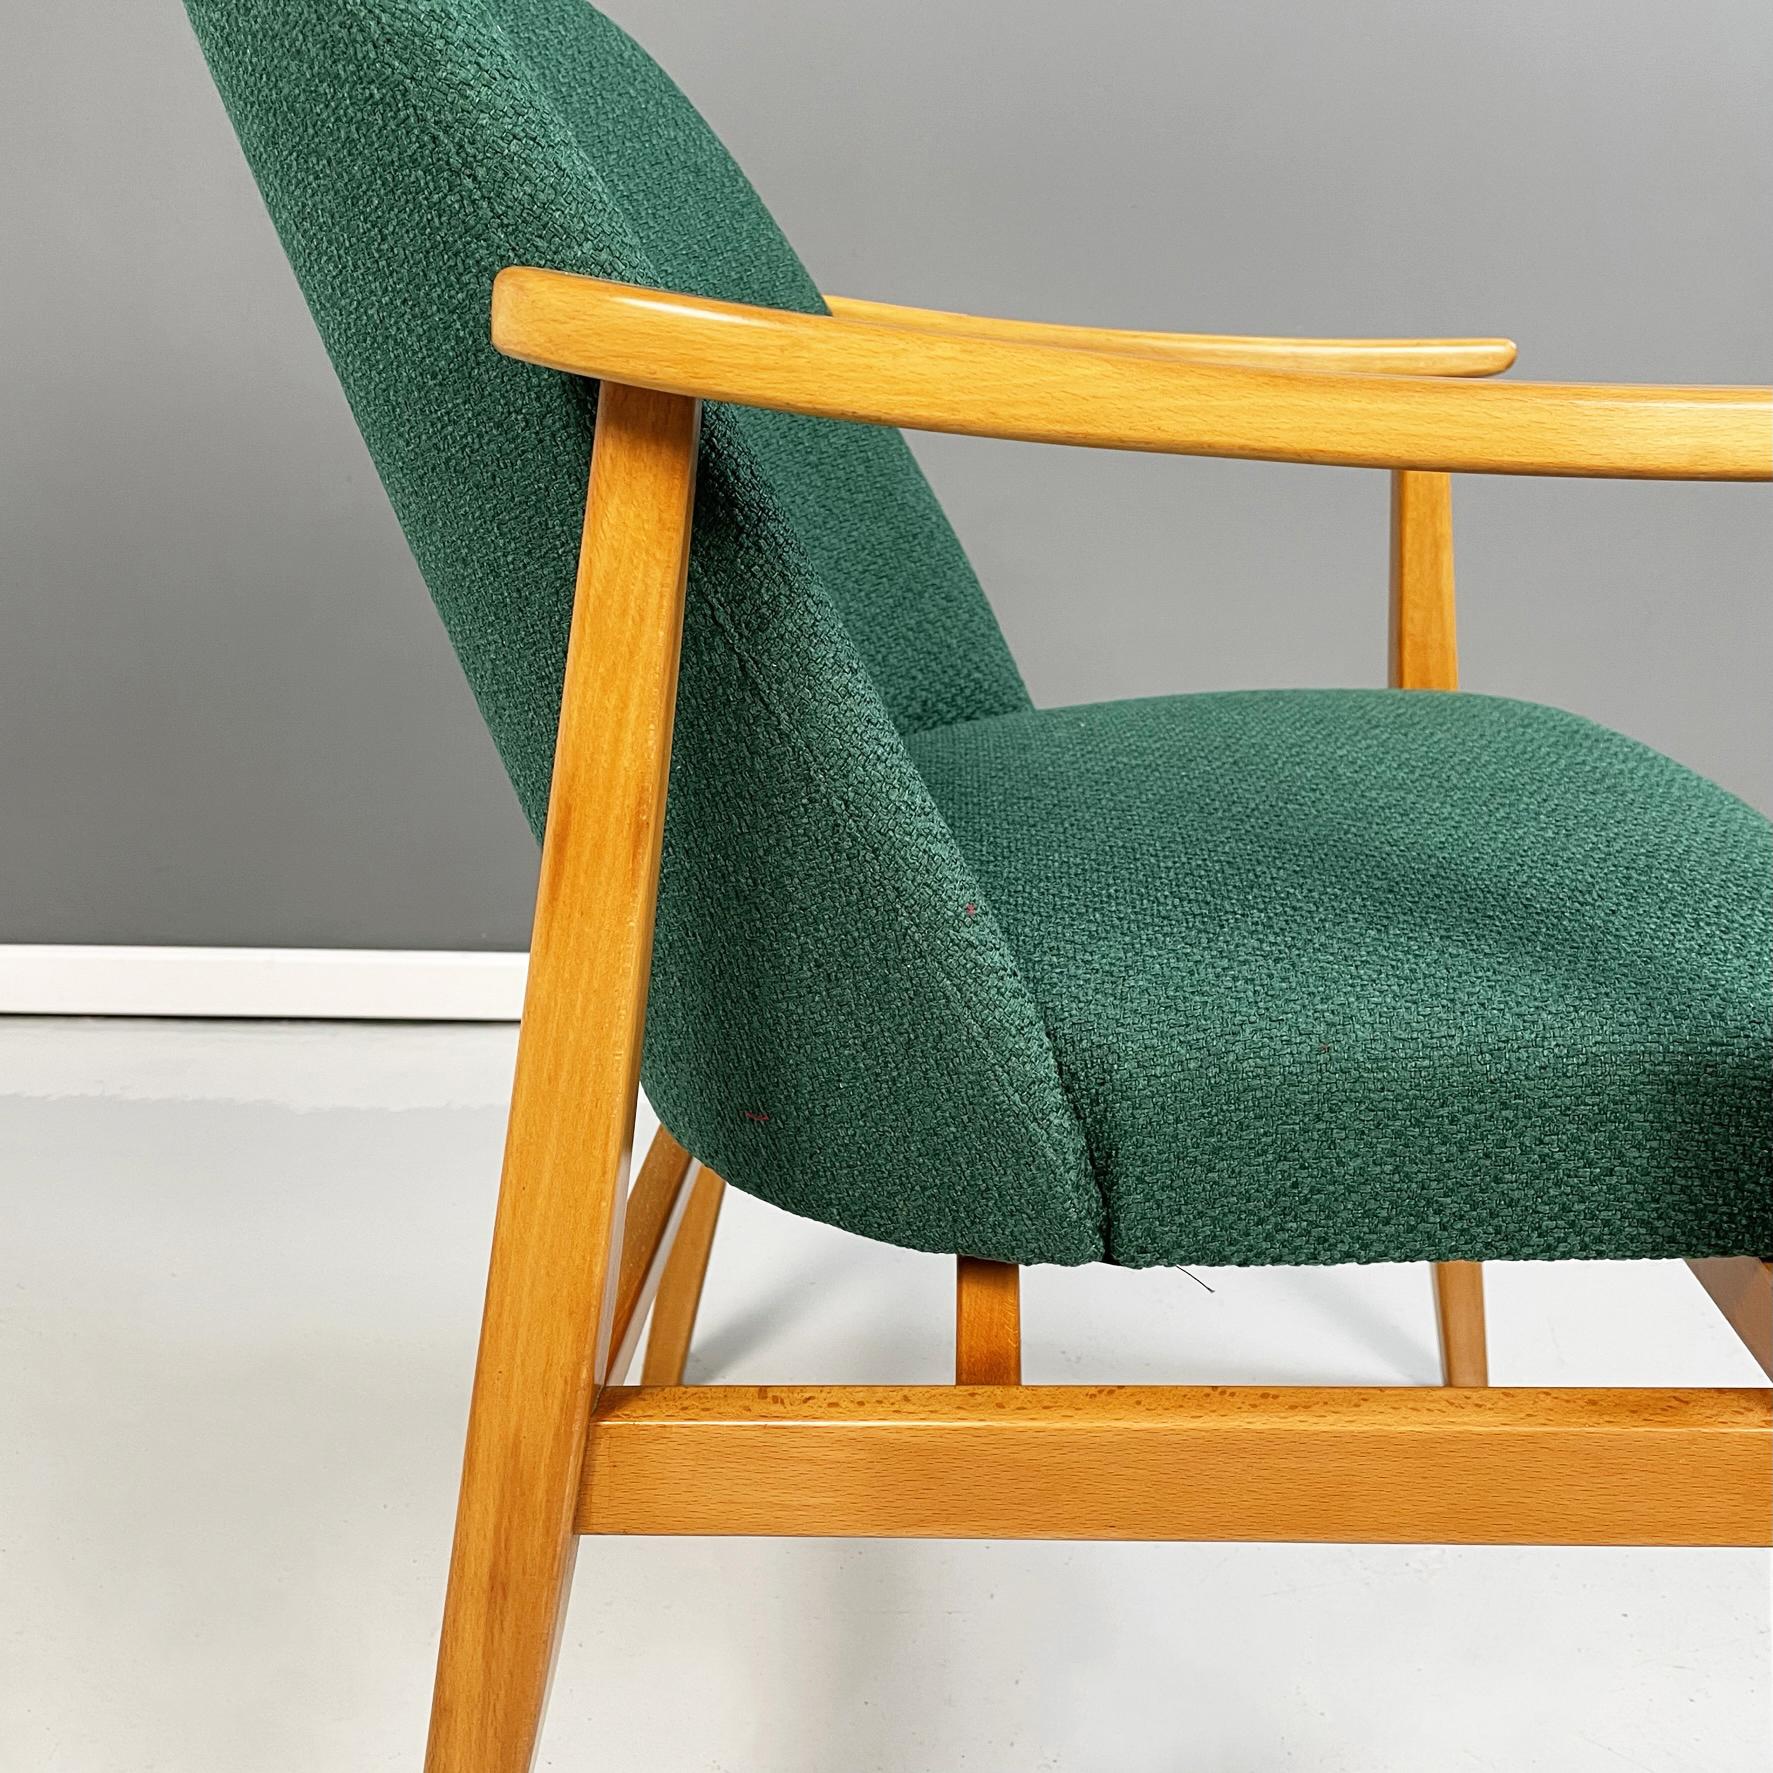 Danish Mid-Century Modern Armchairs in Forest Green Fabric and Wood, 1960s For Sale 7